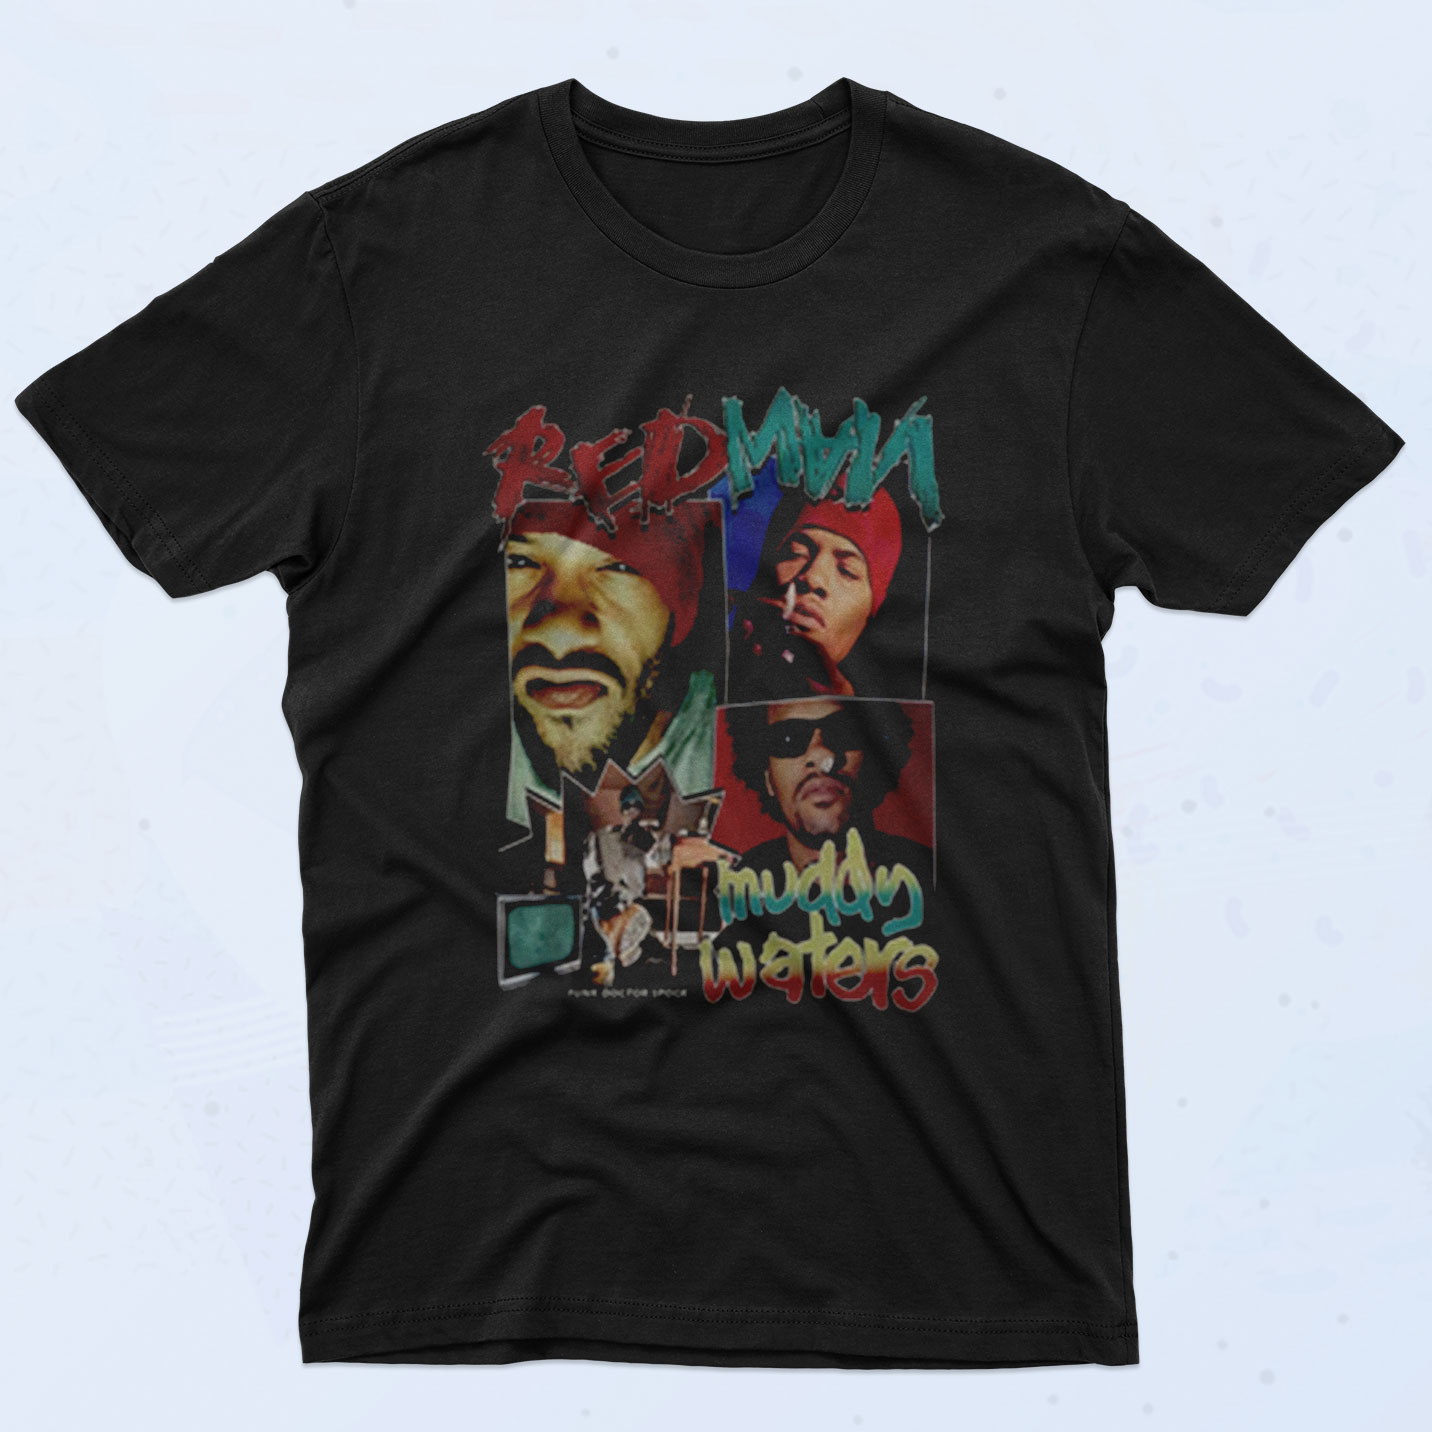 Redman Rapper Muddy Waters 90s T Shirt Style - 90sclothes.com